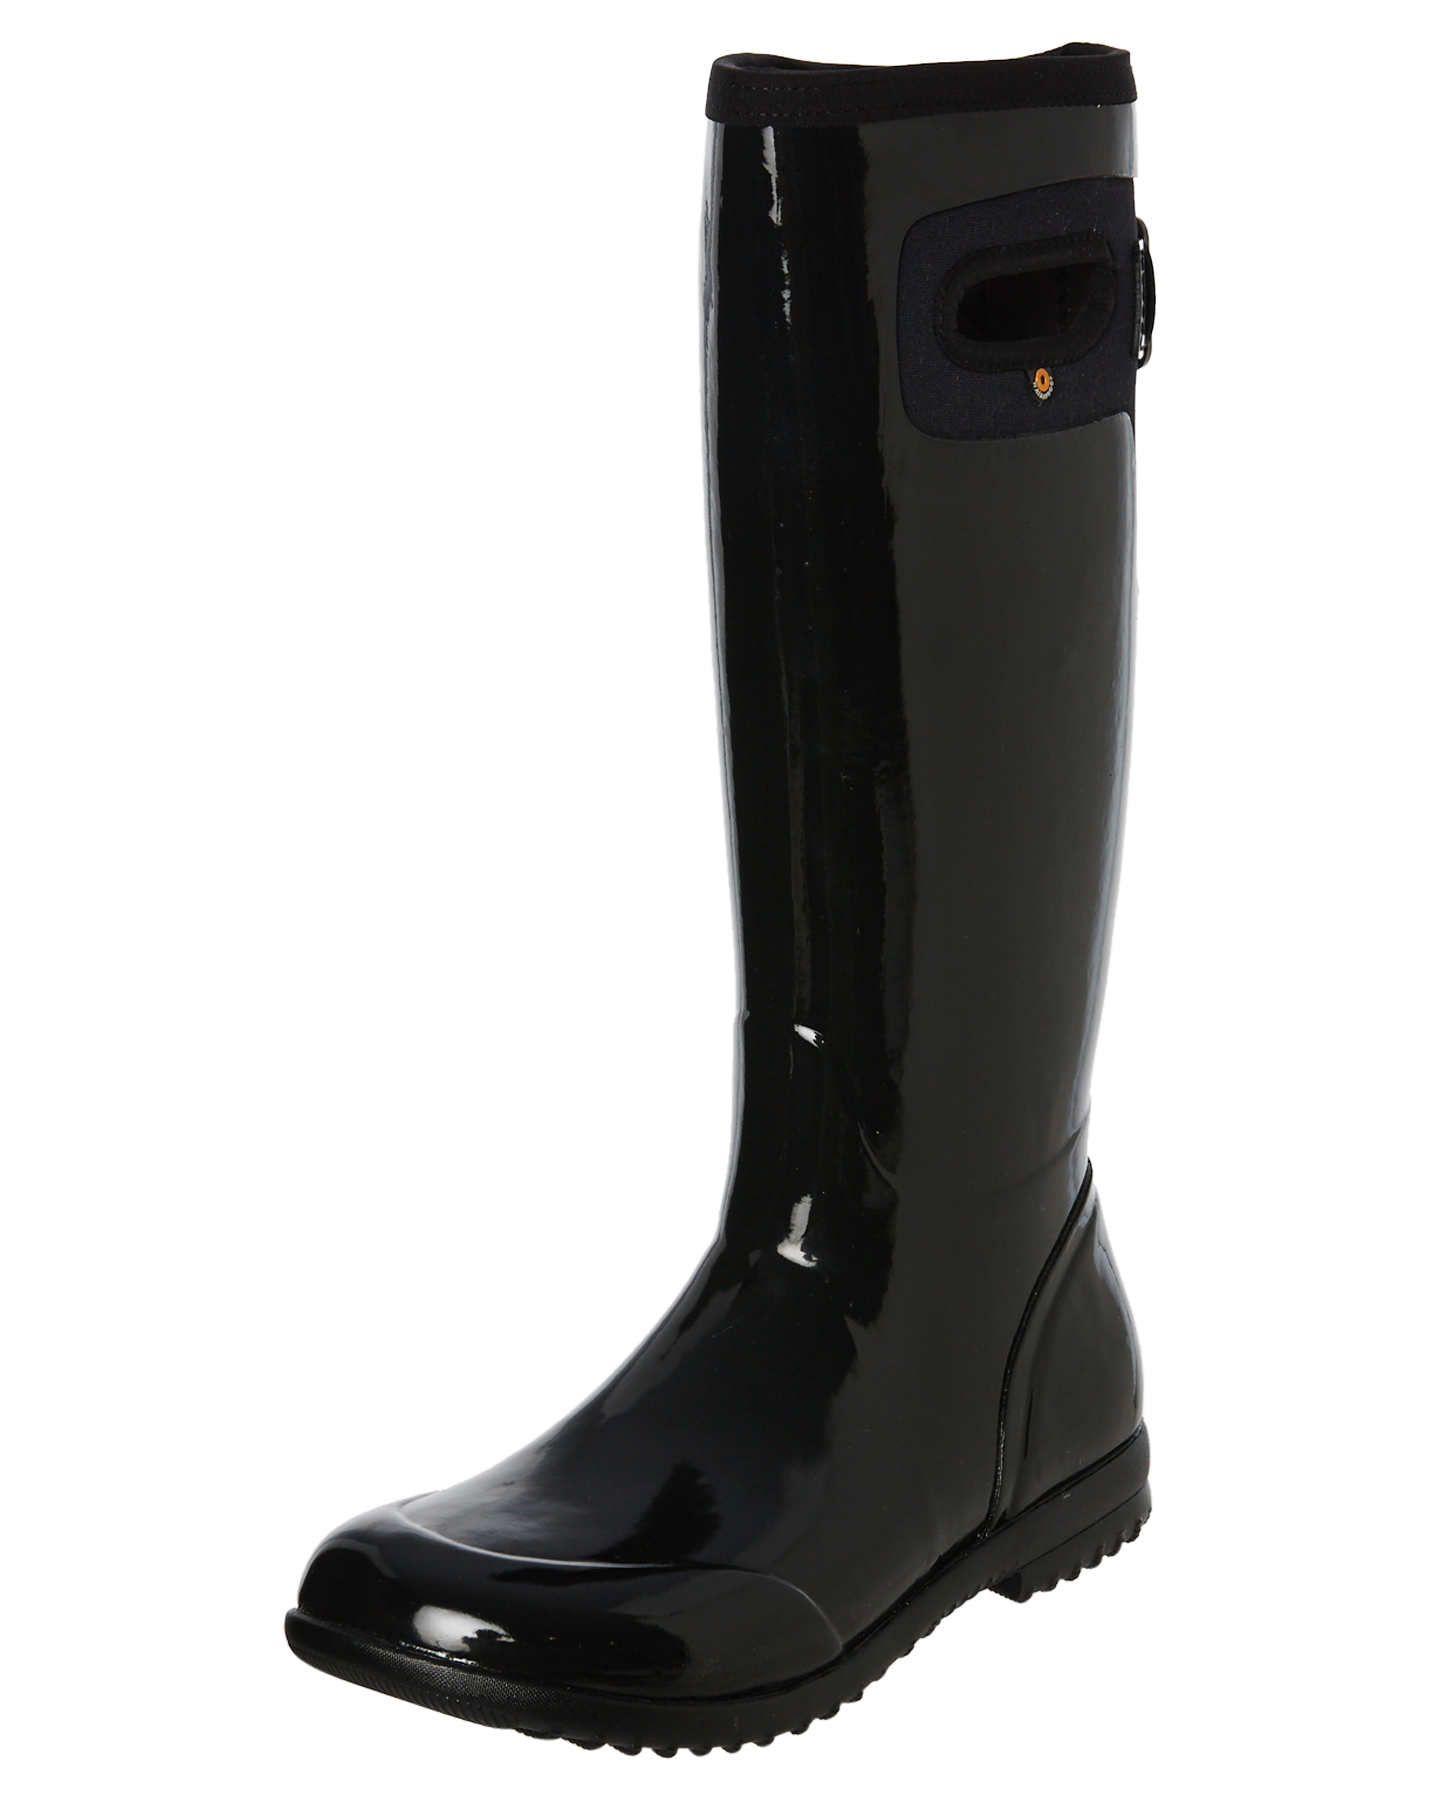 Bogs Footwear Womens Tacoma Solid Tall Boot - Black | SurfStitch